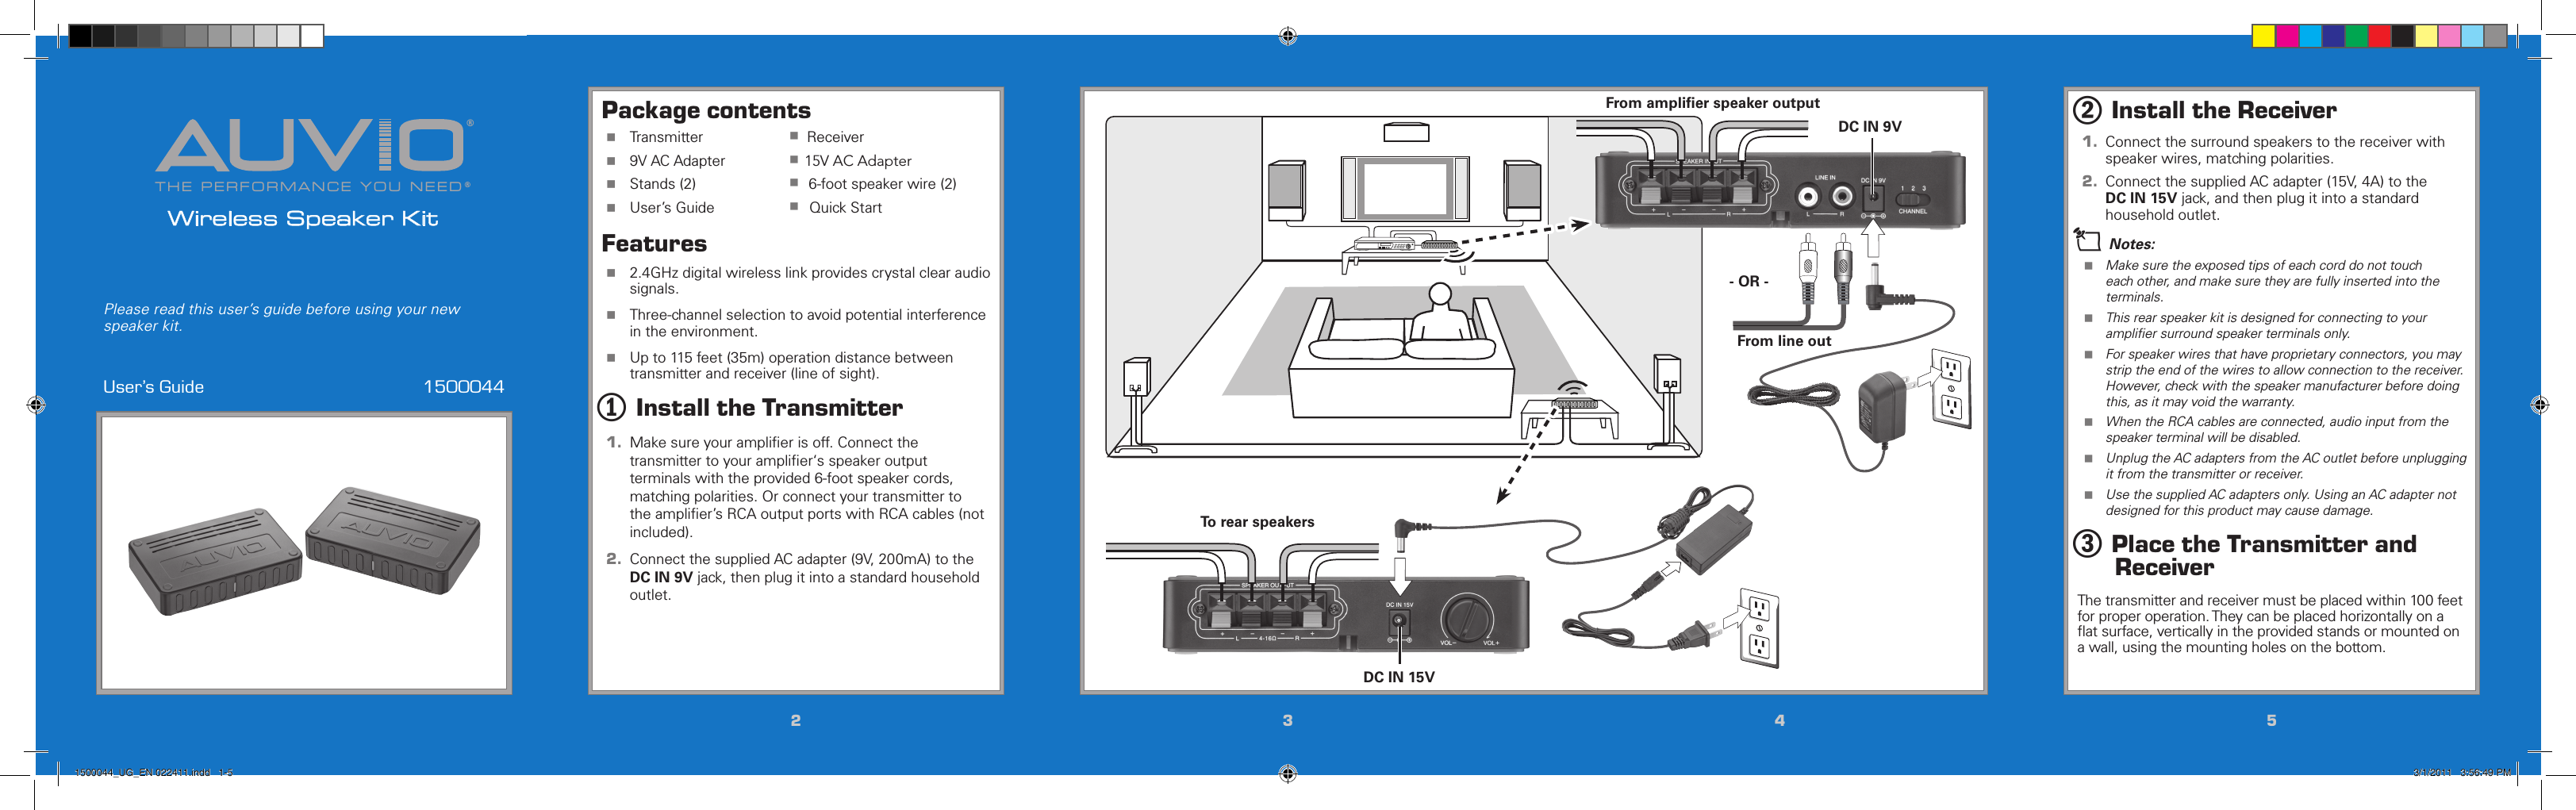 THE PERFORMANCE YOU NEED®®Wireless Speaker KitUser’s Guide  1500044Please read this user’s guide before using your new speaker kit.22334455Package contents Transmitter  D    Receiver 9V AC Adapter  D   15V AC Adapter Stands (2)  D    6-foot speaker wire (2) User’s Guide  D     Quick StartFeatures 2.4GHz digital wireless link provides crystal clear audio signals. Three-channel selection to avoid potential interference in the environment. Up to 115 feet (35m) operation distance between transmitter and receiver (line of sight).1 Install the Transmitter1.  Make sure your ampliﬁer is off. Connect the transmitter to your ampliﬁer‘s speaker output terminals with the provided 6-foot speaker cords, matching polarities. Or connect your transmitter to the ampliﬁer’s RCA output ports with RCA cables (not included). 2.  Connect the supplied AC adapter (9V, 200mA) to the DC IN 9V jack, then plug it into a standard household outlet.2 Install the Receiver1.  Connect the surround speakers to the receiver with speaker wires, matching polarities. 2.  Connect the supplied AC adapter (15V, 4A) to the DC IN 15V jack, and then plug it into a standard household outlet.n Notes: Make sure the exposed tips of each cord do not touch each other, and make sure they are fully inserted into the terminals. This rear speaker kit is designed for connecting to your ampliﬁer surround speaker terminals only. For speaker wires that have proprietary connectors, you may strip the end of the wires to allow connection to the receiver. However, check with the speaker manufacturer before doing this, as it may void the warranty. When the RCA cables are connected, audio input from the speaker terminal will be disabled. Unplug the AC adapters from the AC outlet before unplugging it from the transmitter or receiver. Use the supplied AC adapters only. Using an AC adapter not designed for this product may cause damage.3 Place the Transmitter and ReceiverThe transmitter and receiver must be placed within 100 feet for proper operation. They can be placed horizontally on a ﬂat surface, vertically in the provided stands or mounted on a wall, using the mounting holes on the bottom.DC IN 9VDC IN 15V- OR -To rear speakersFrom ampliﬁer speaker outputFrom line out1500044_UG_EN 022411.indd   1-5 3/1/2011   3:56:49 PM